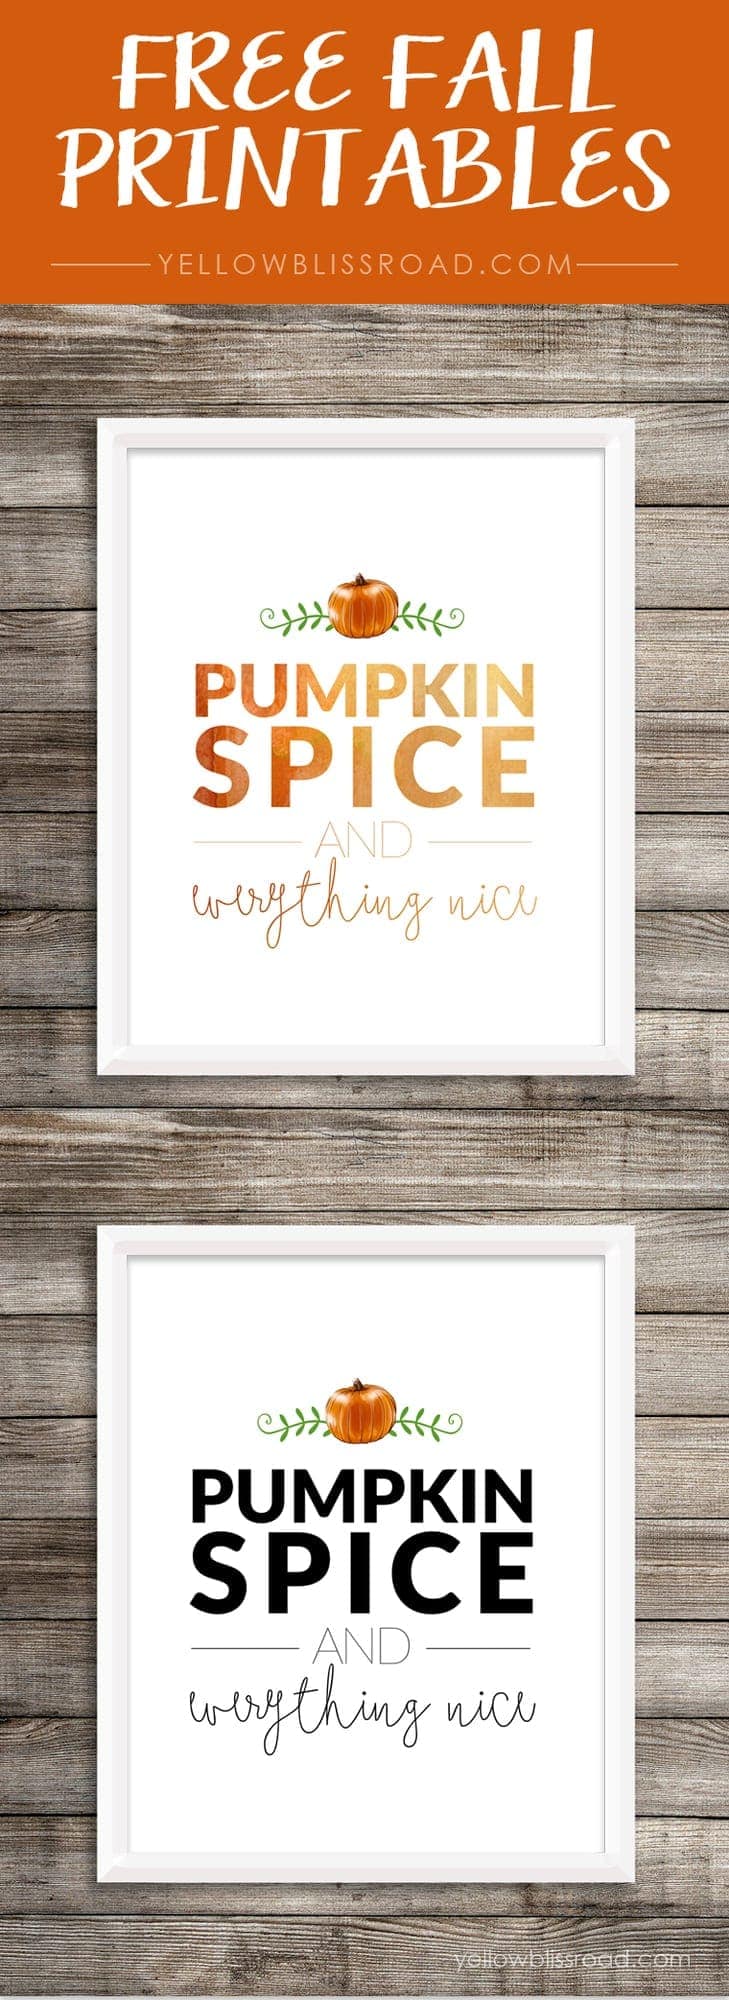 Pumpkin Spice and Everything Nice Printables for Fall